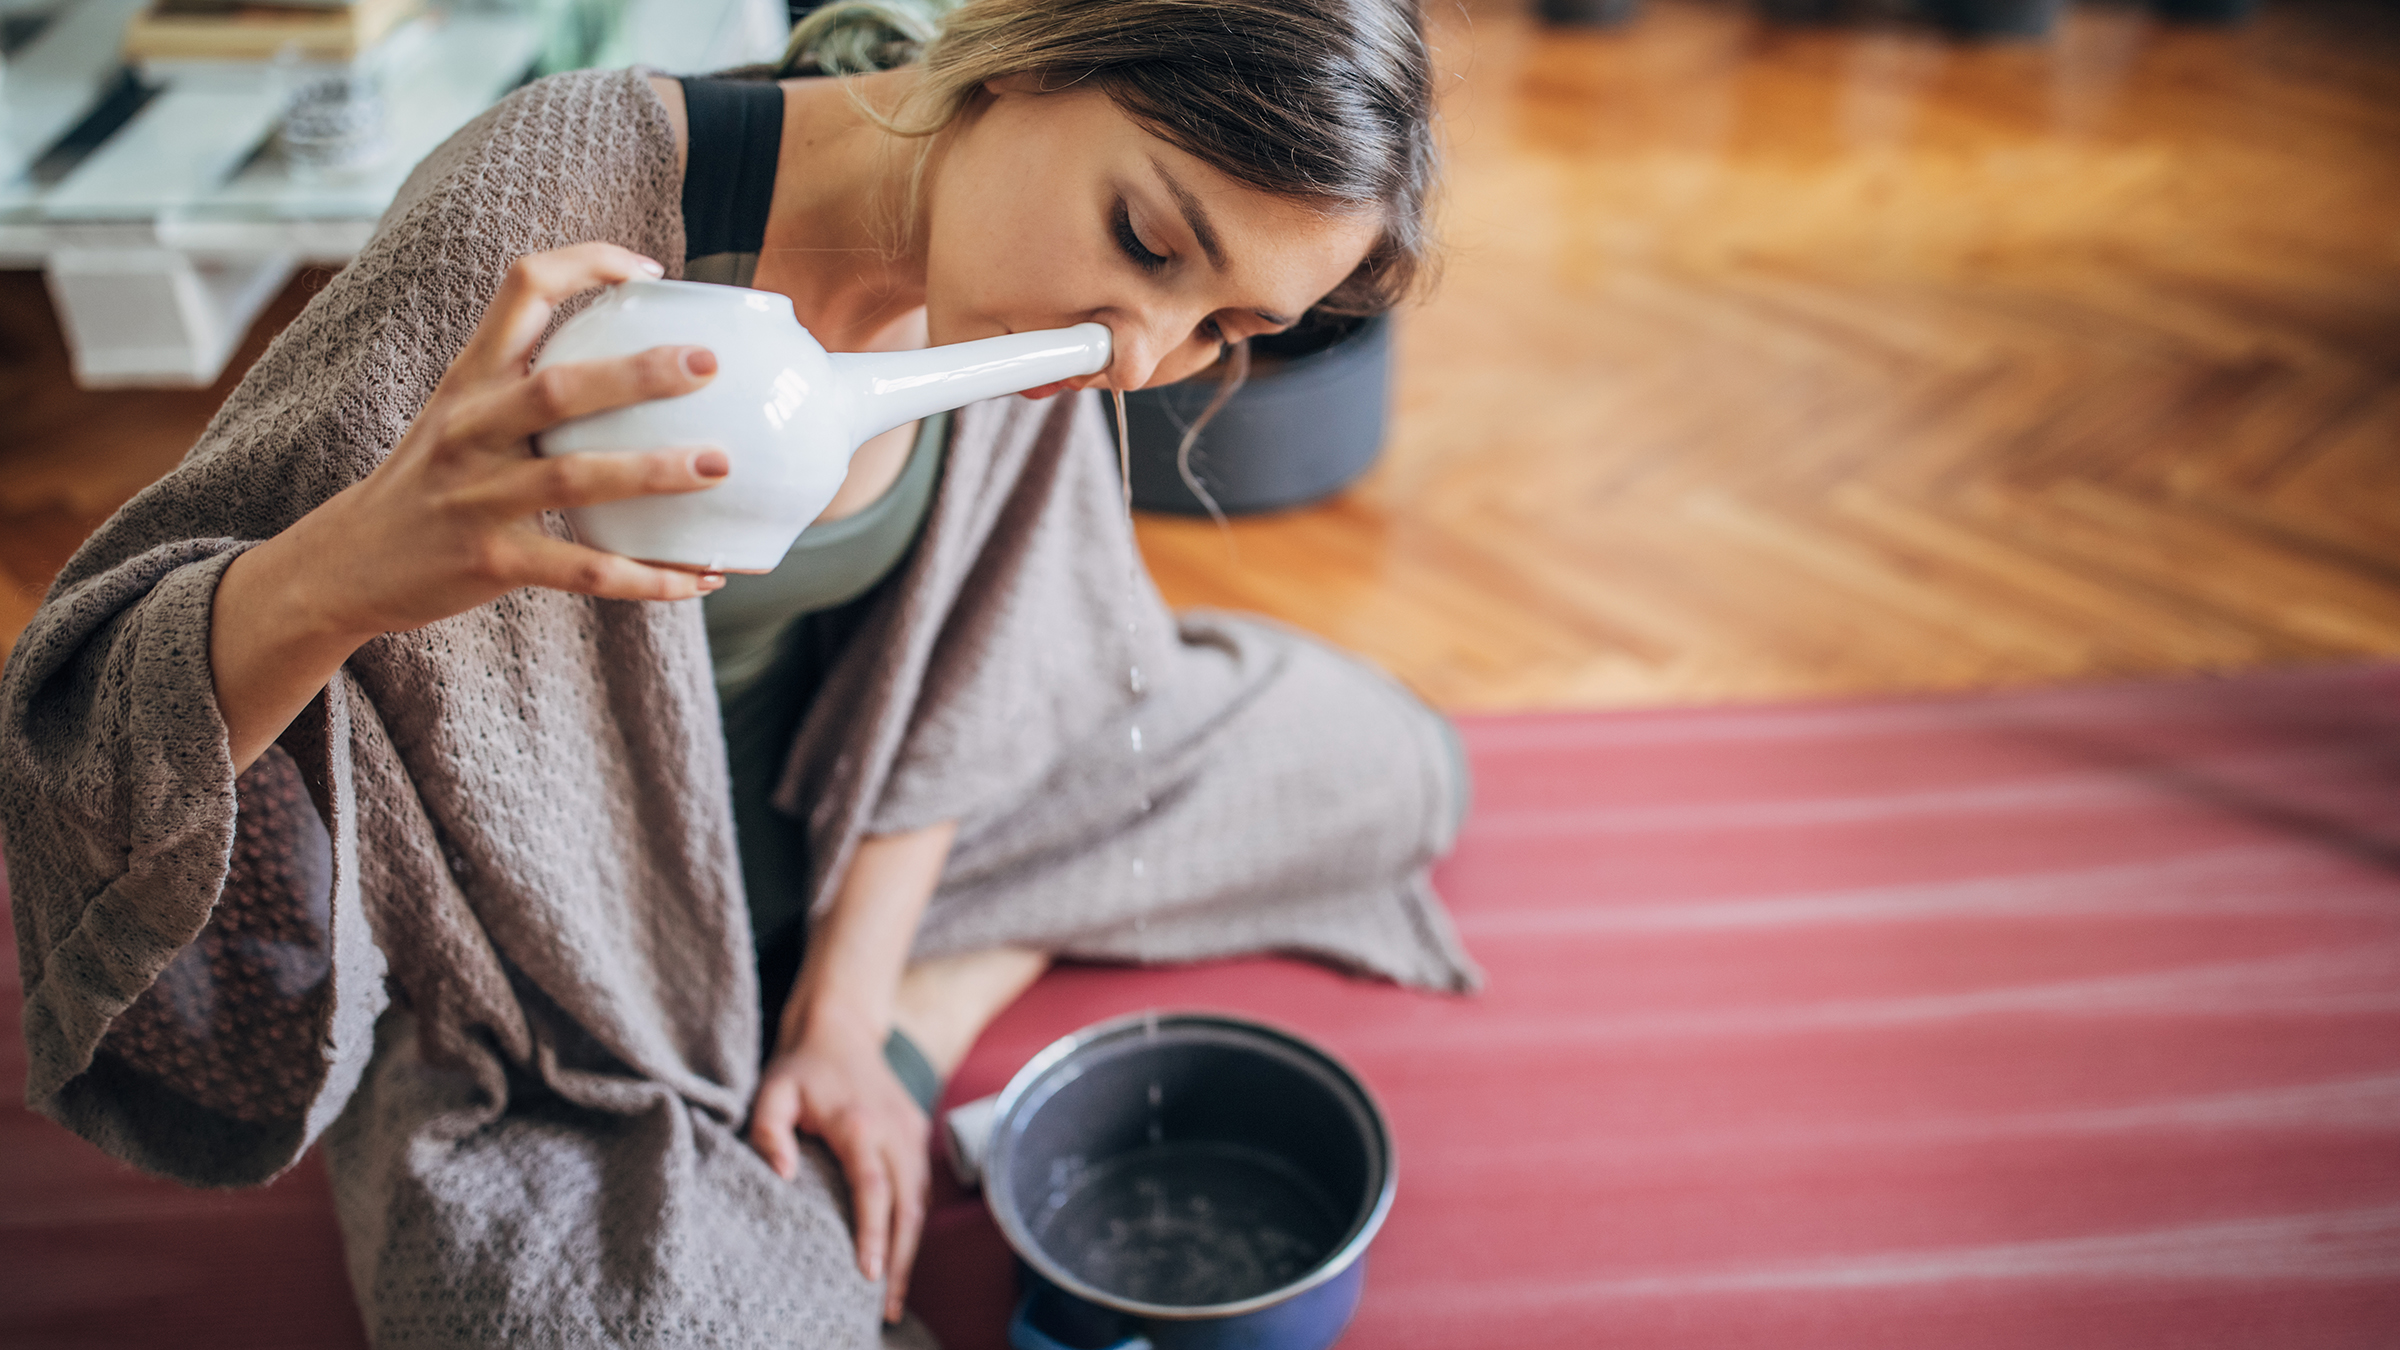 Is Rinsing Your Sinuses With Neti Pots Safe?